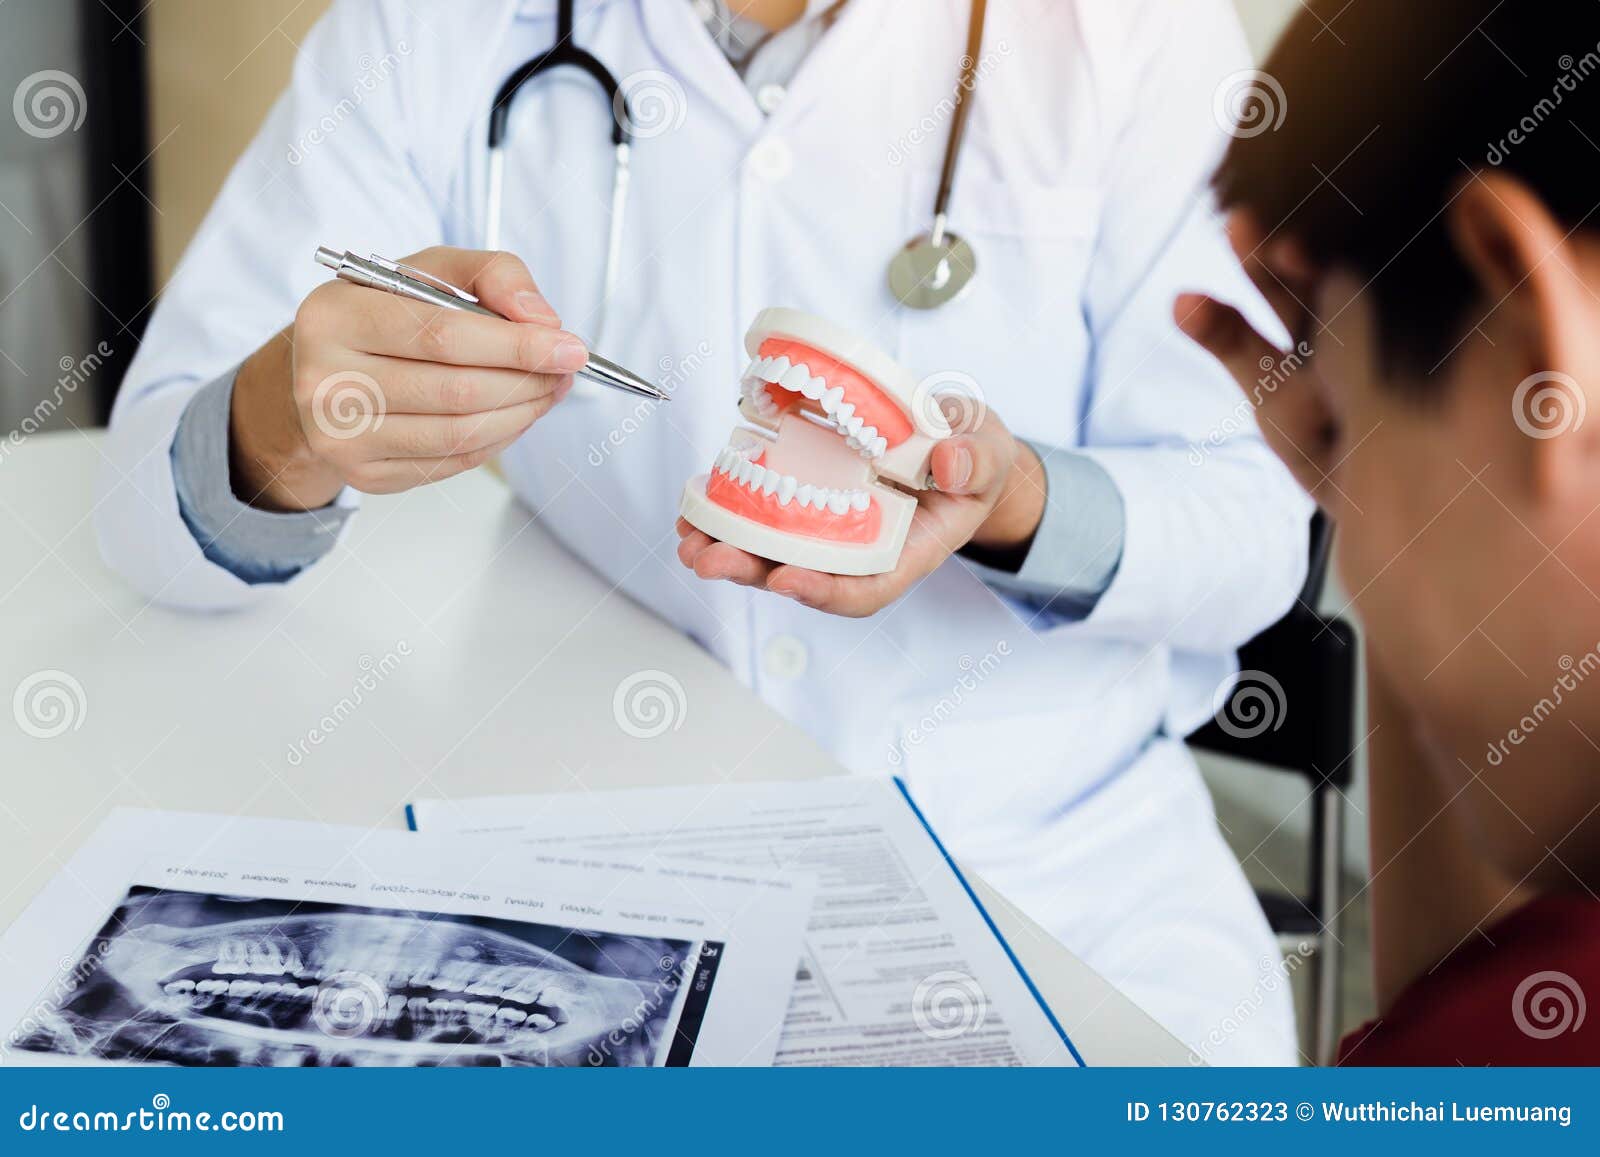 asian dentist holding pen pointing to the dentures and is describing the problem of teeth.